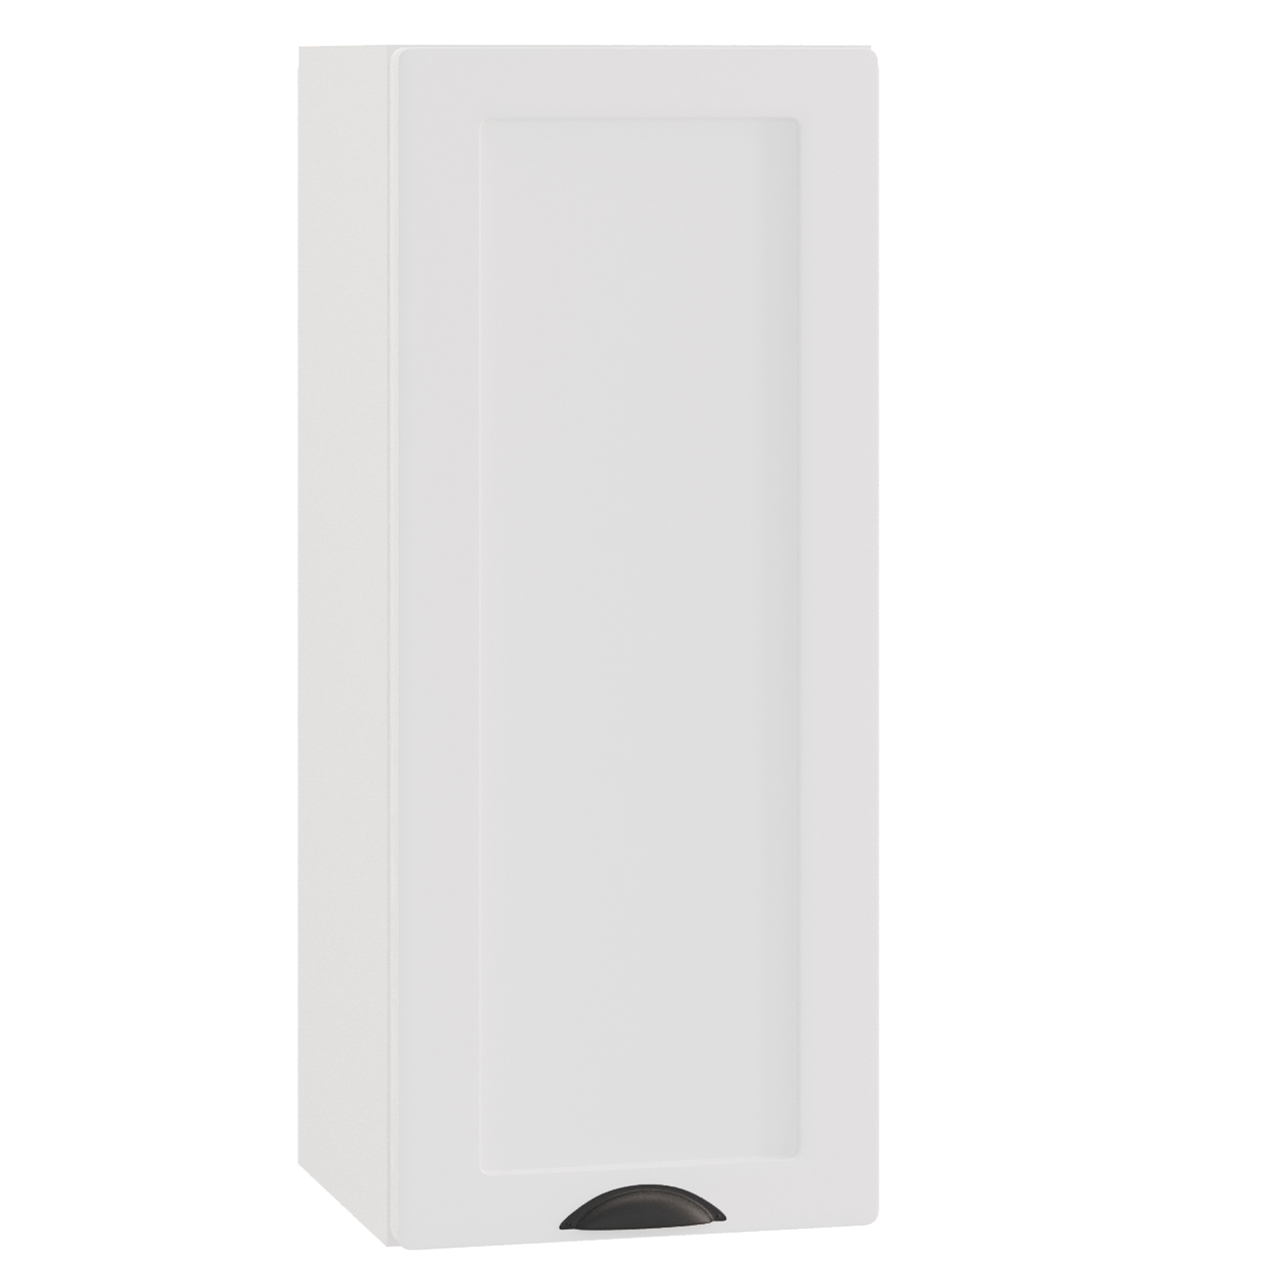 Wall Cabinet ADELE W30 P/L white